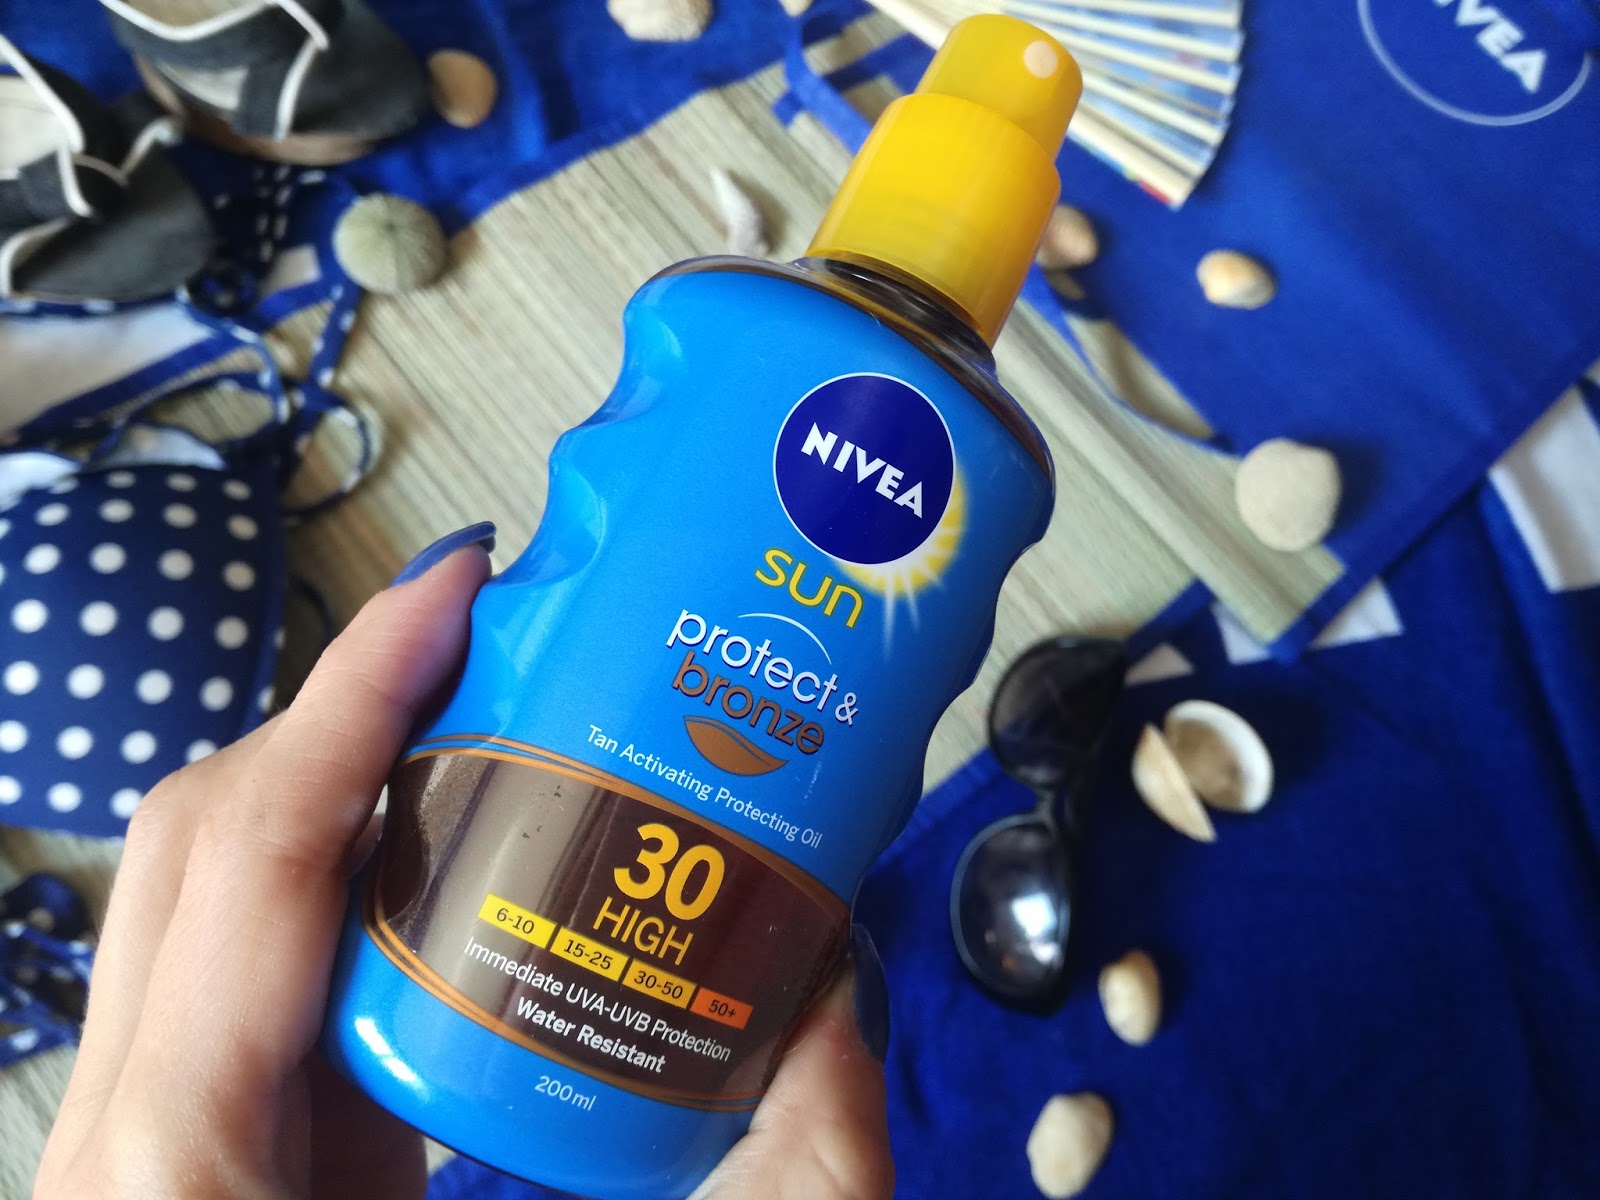 nivea-sun-protect-and-bronze-tan-activating-protection-oil